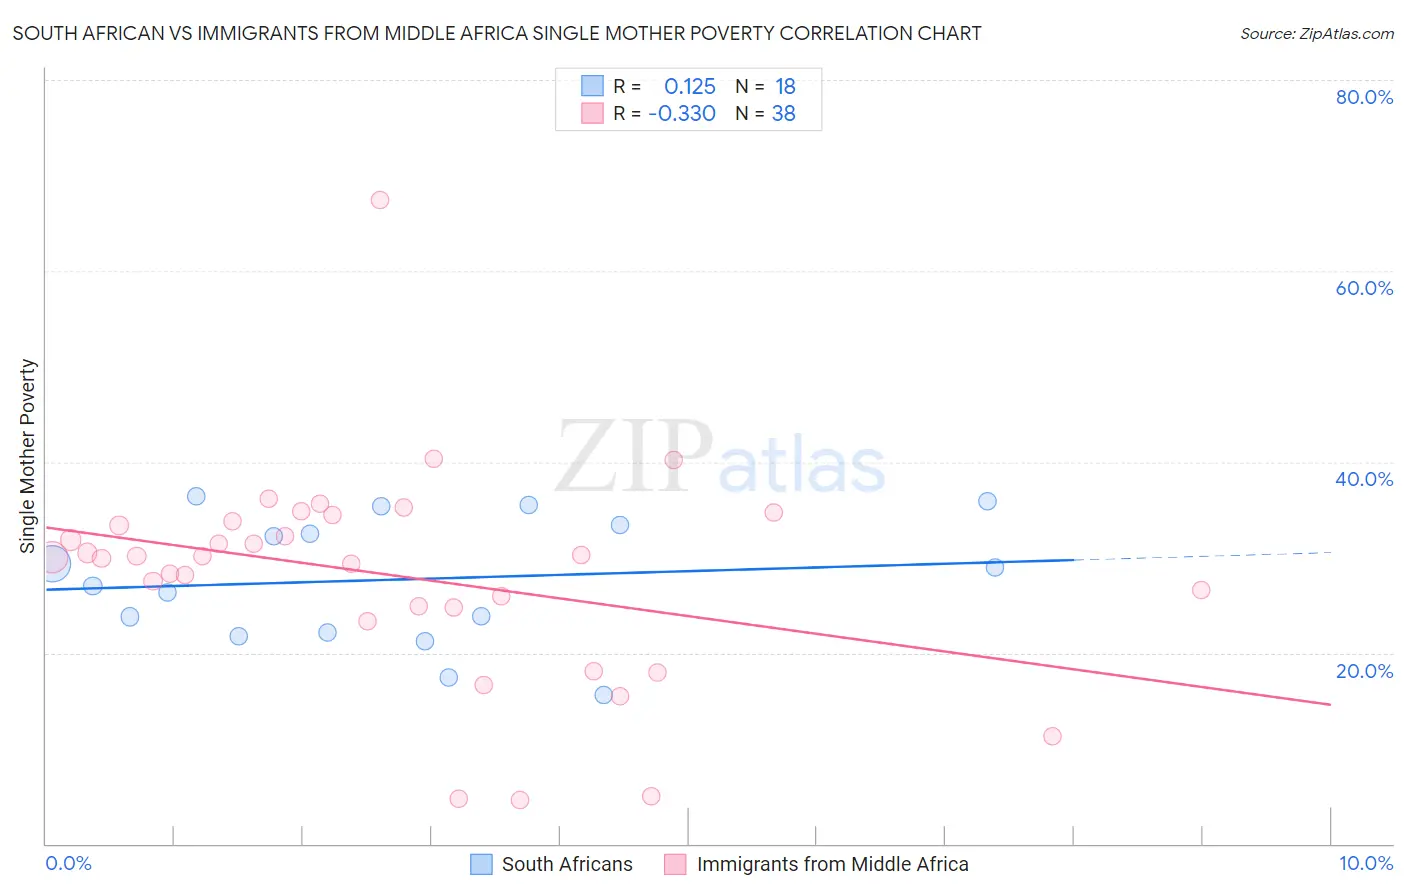 South African vs Immigrants from Middle Africa Single Mother Poverty